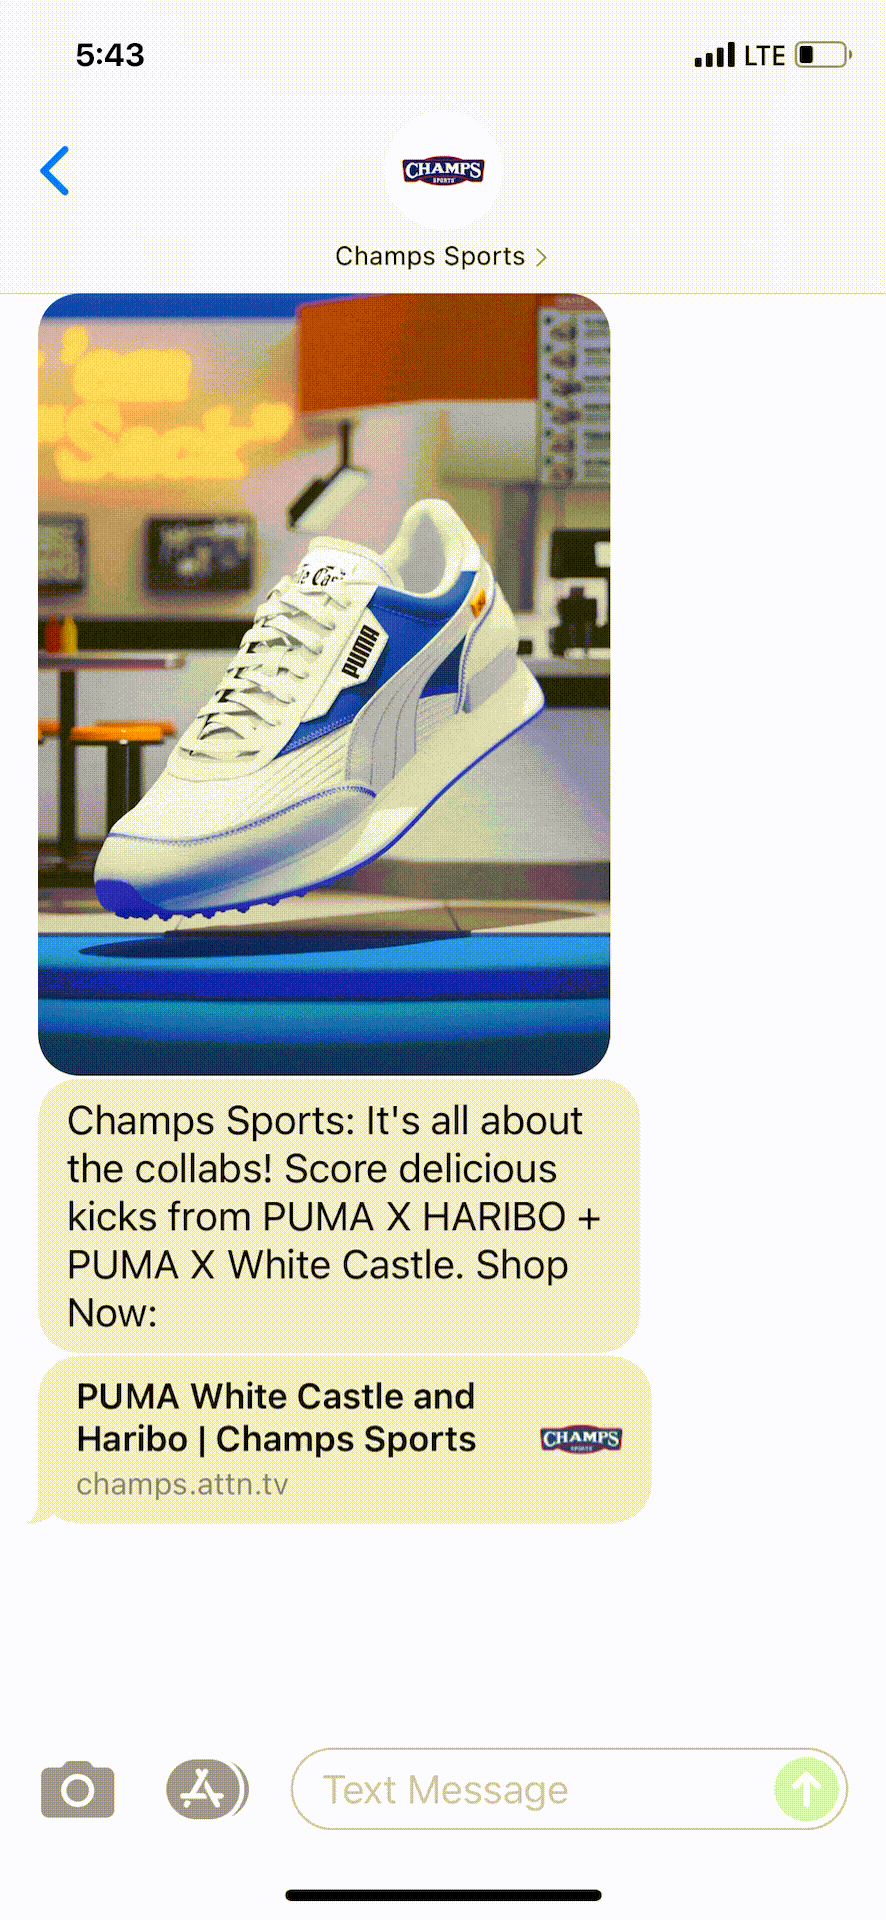 Champs-Sports-Text-Message-Marketing-Example-07.23.2021